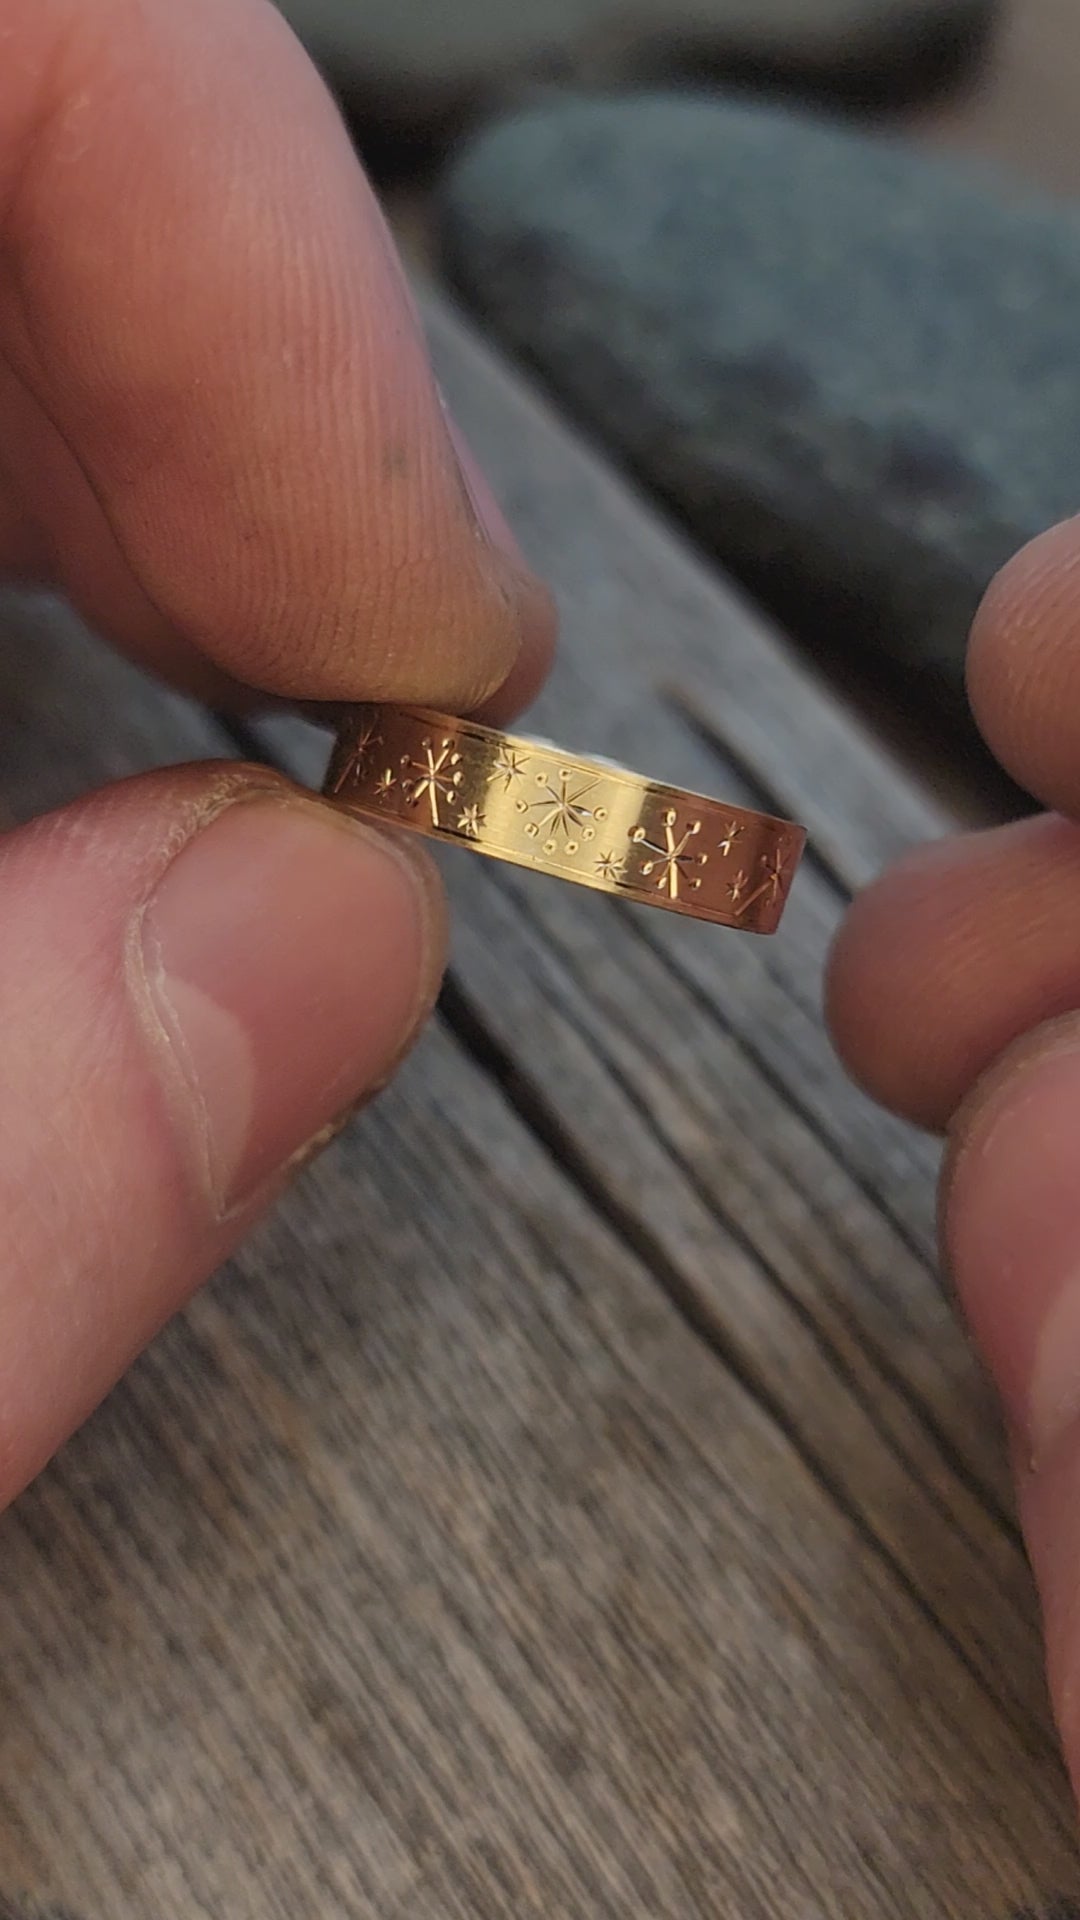 5x1.2mm Dandelion and Stars Ring - Gold Bright Cut Engraved Band